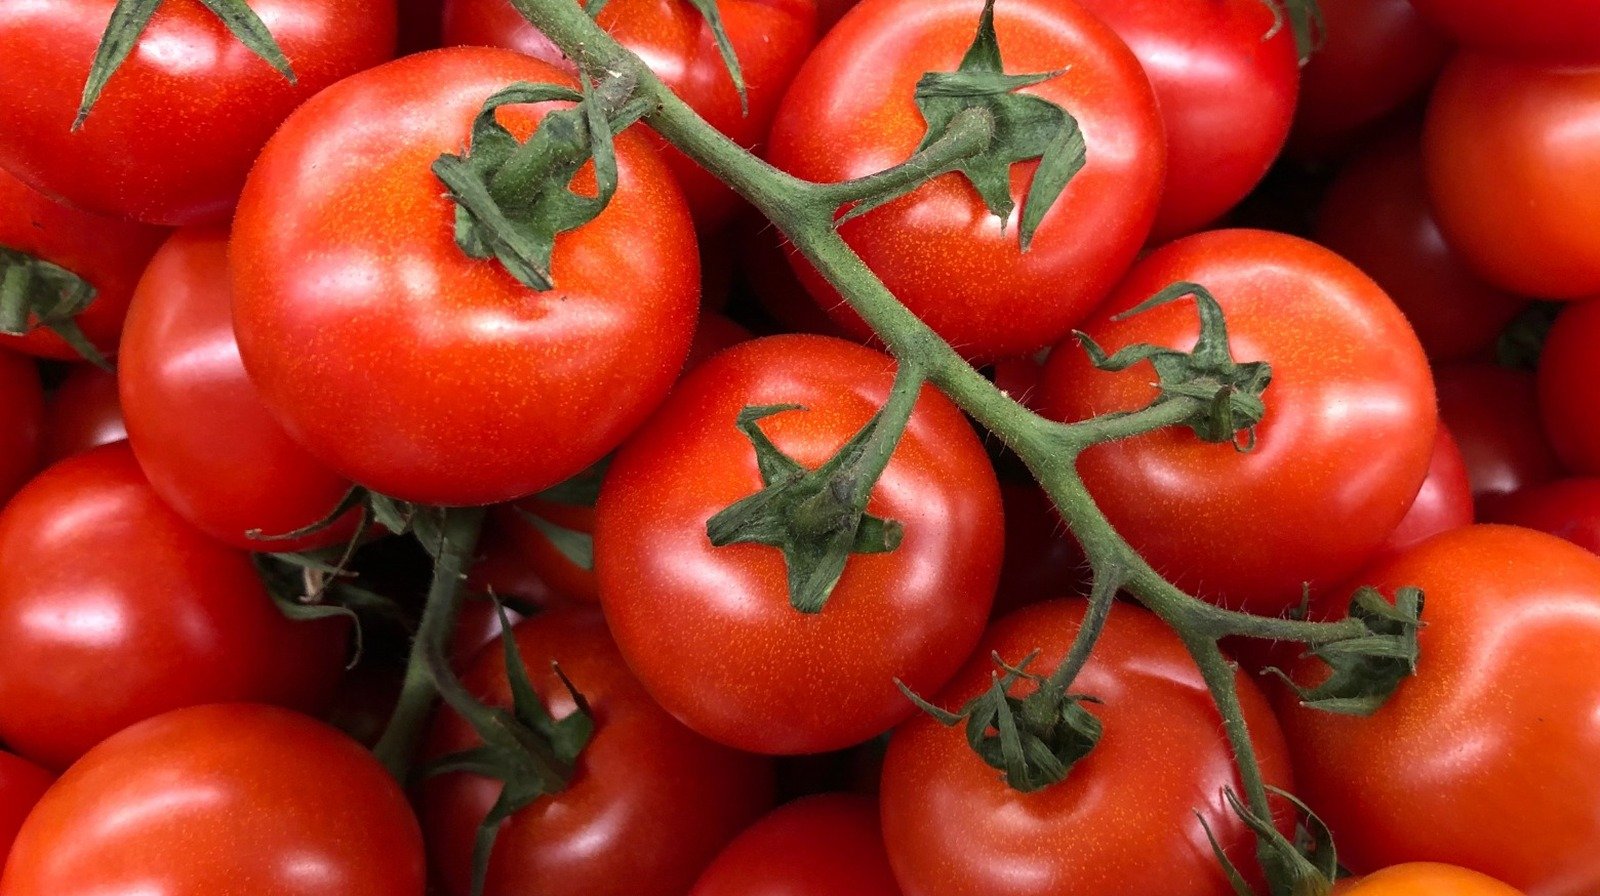 20 Tricks To Make Your Tomatoes Even More Delicious